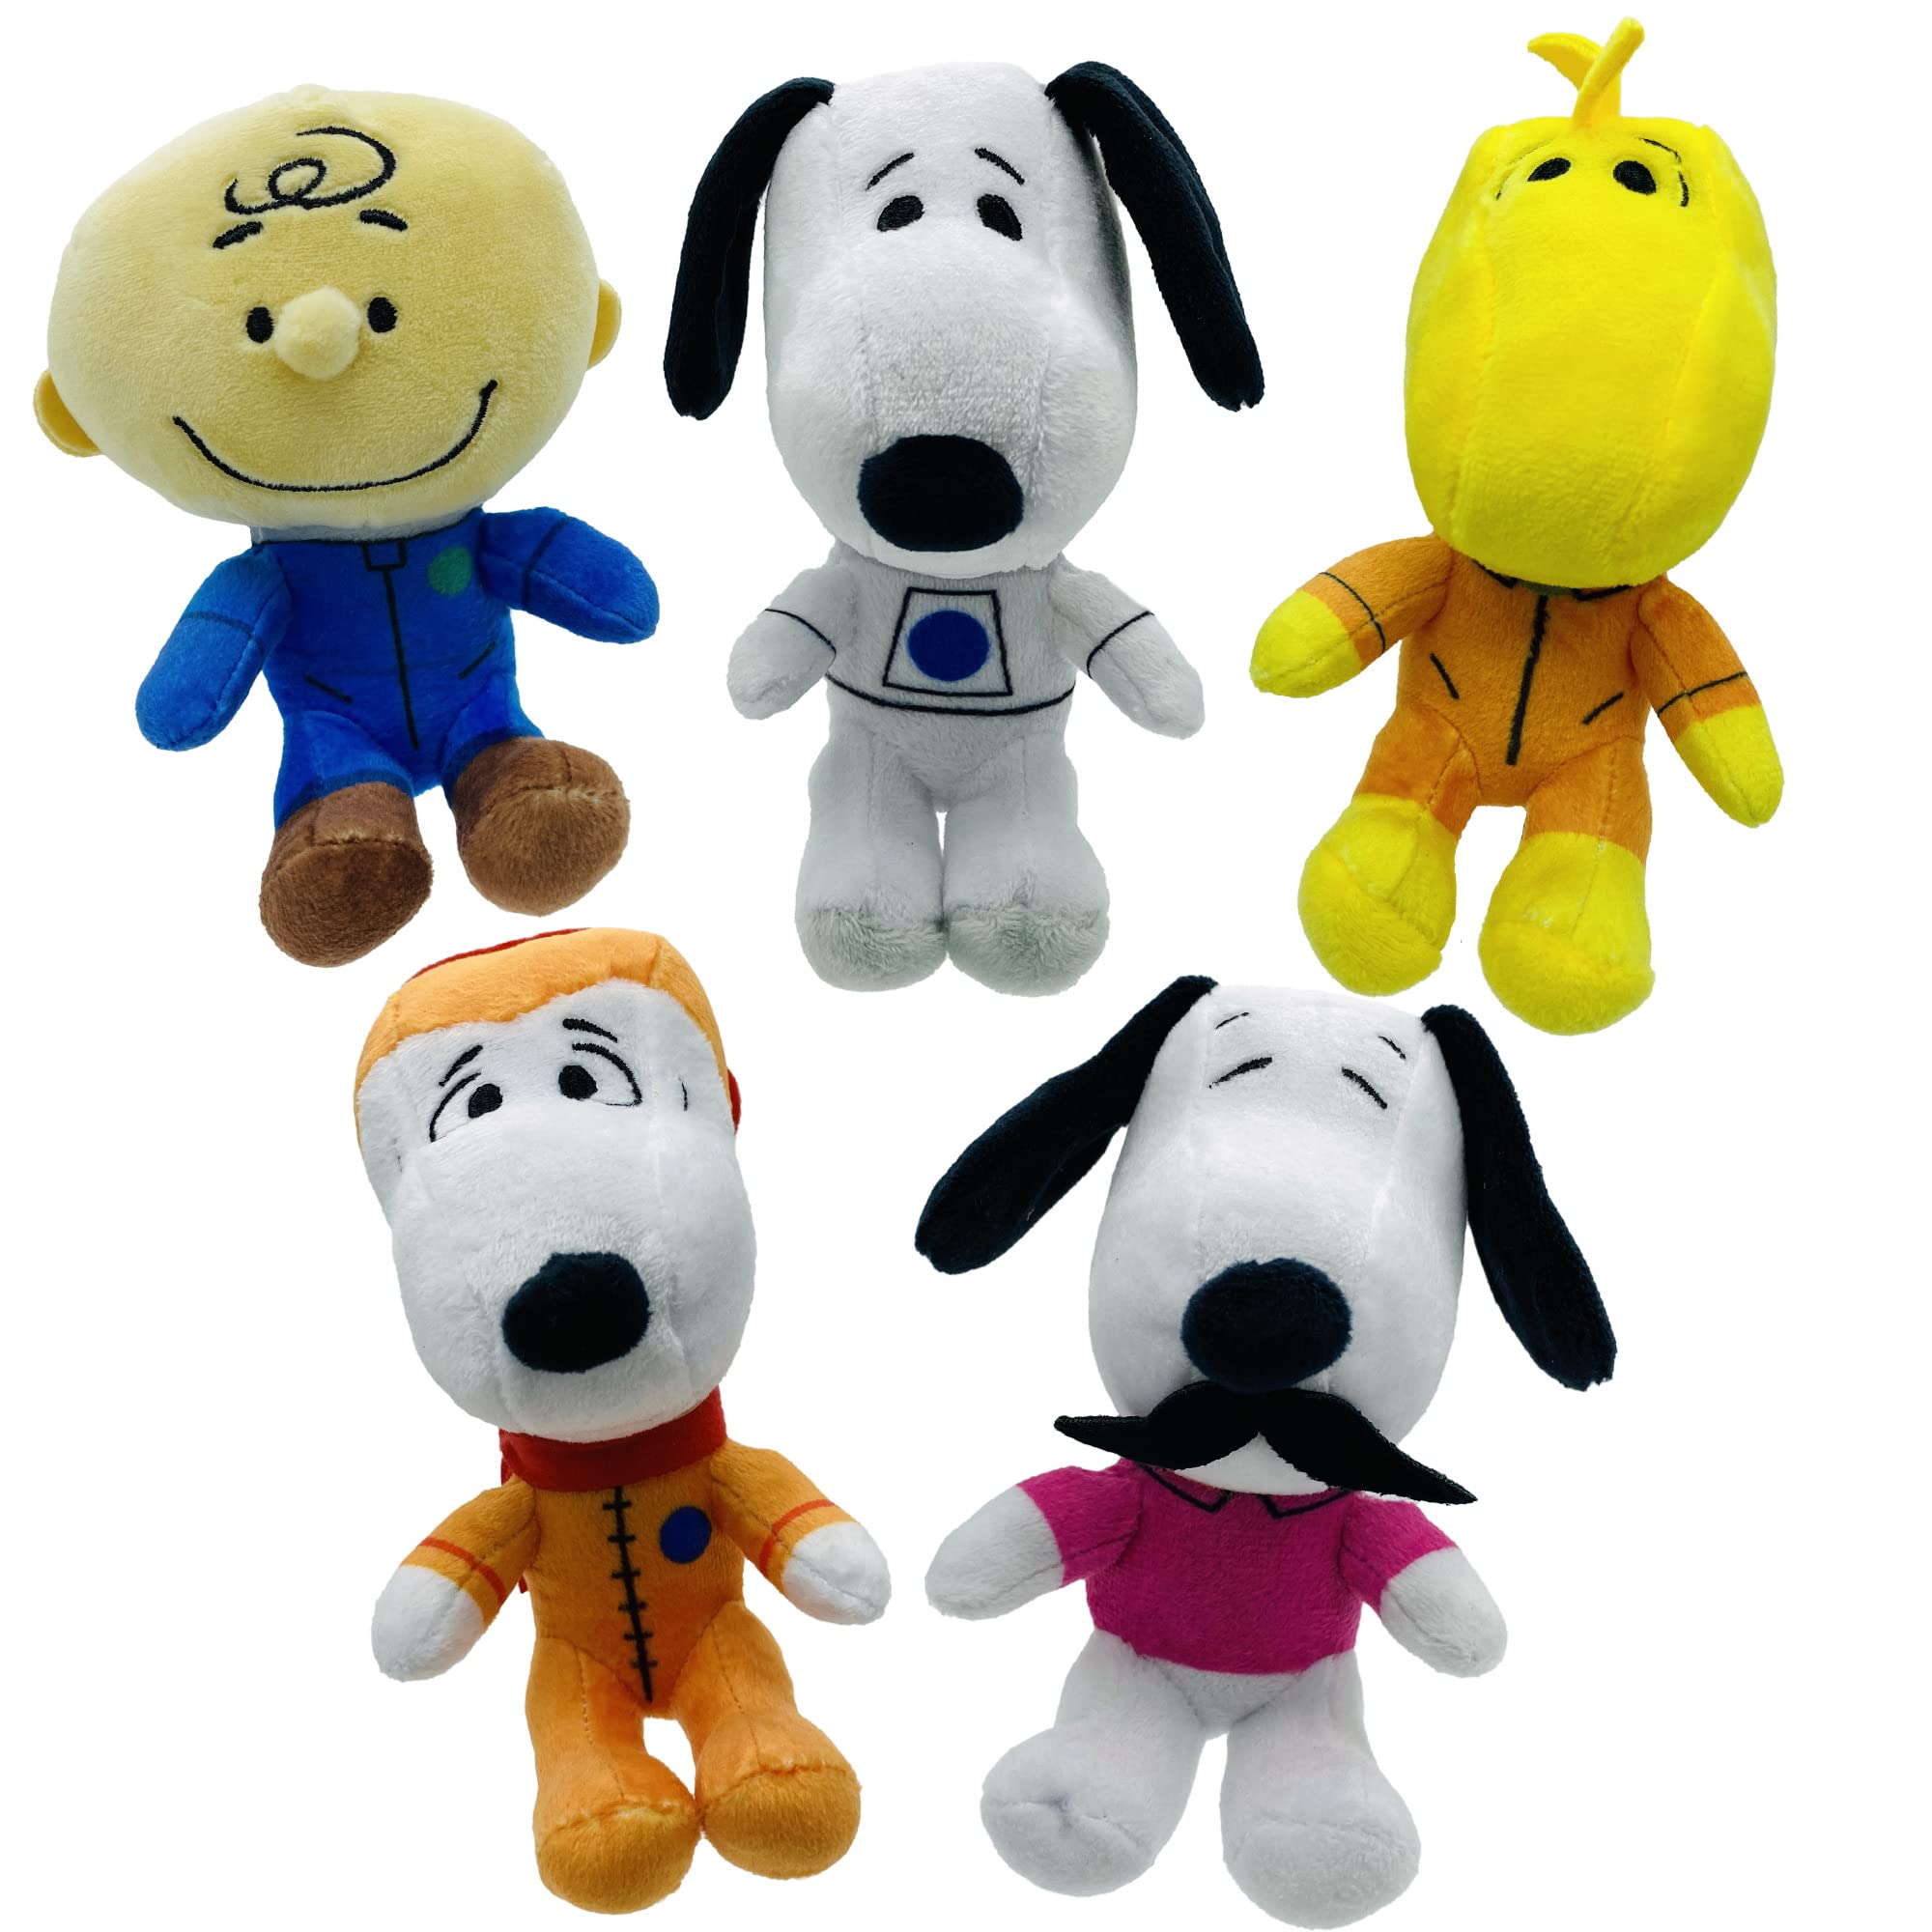 JINX Official Peanuts Collectible Plush Snoopy, Excellent Plushie Toy for Toddlers & Preschool, Super Cute White Astronaut NASA